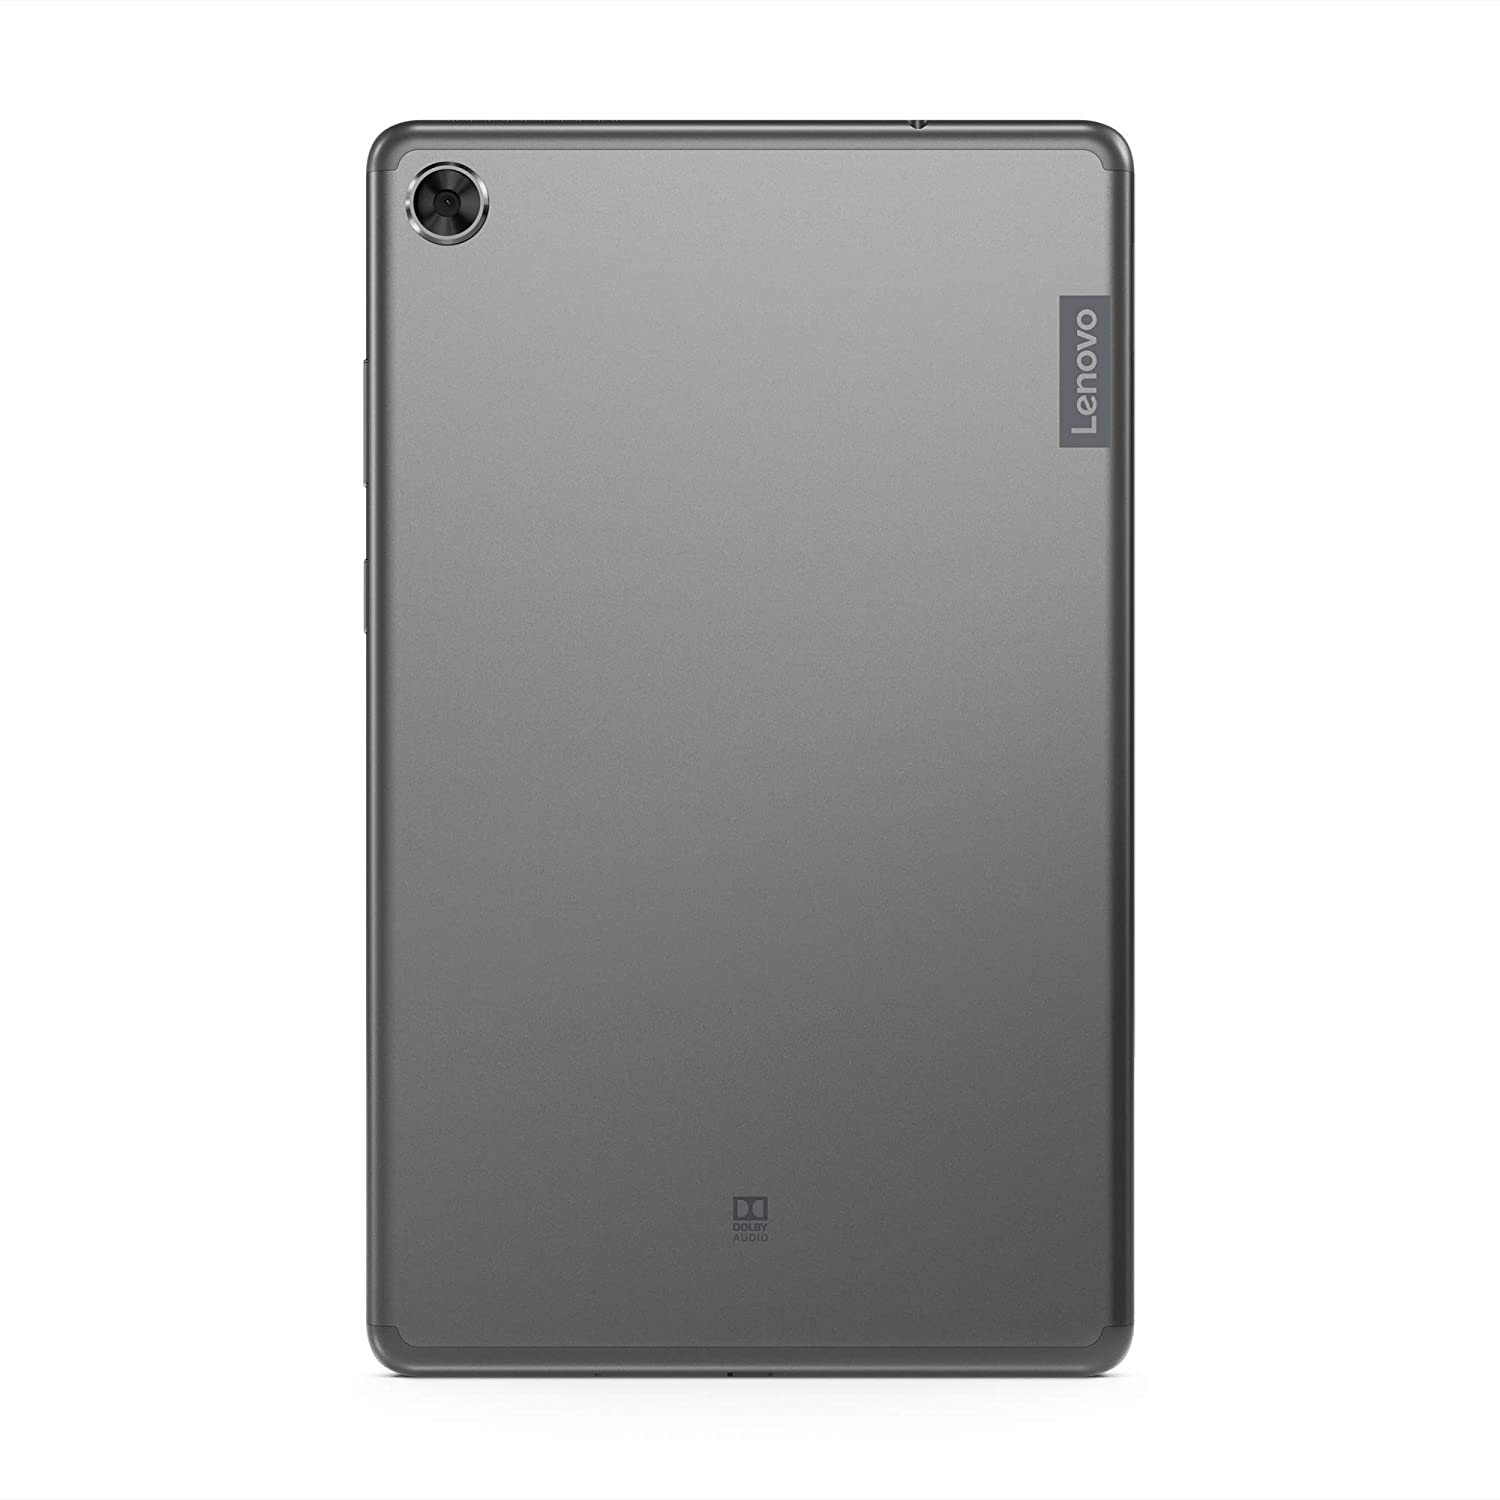 Tab M8 HD (2nd Gen) ZA5G - Tablet - Android 9.0 (Pie) - 16 GB - 8" - image 2 of 7